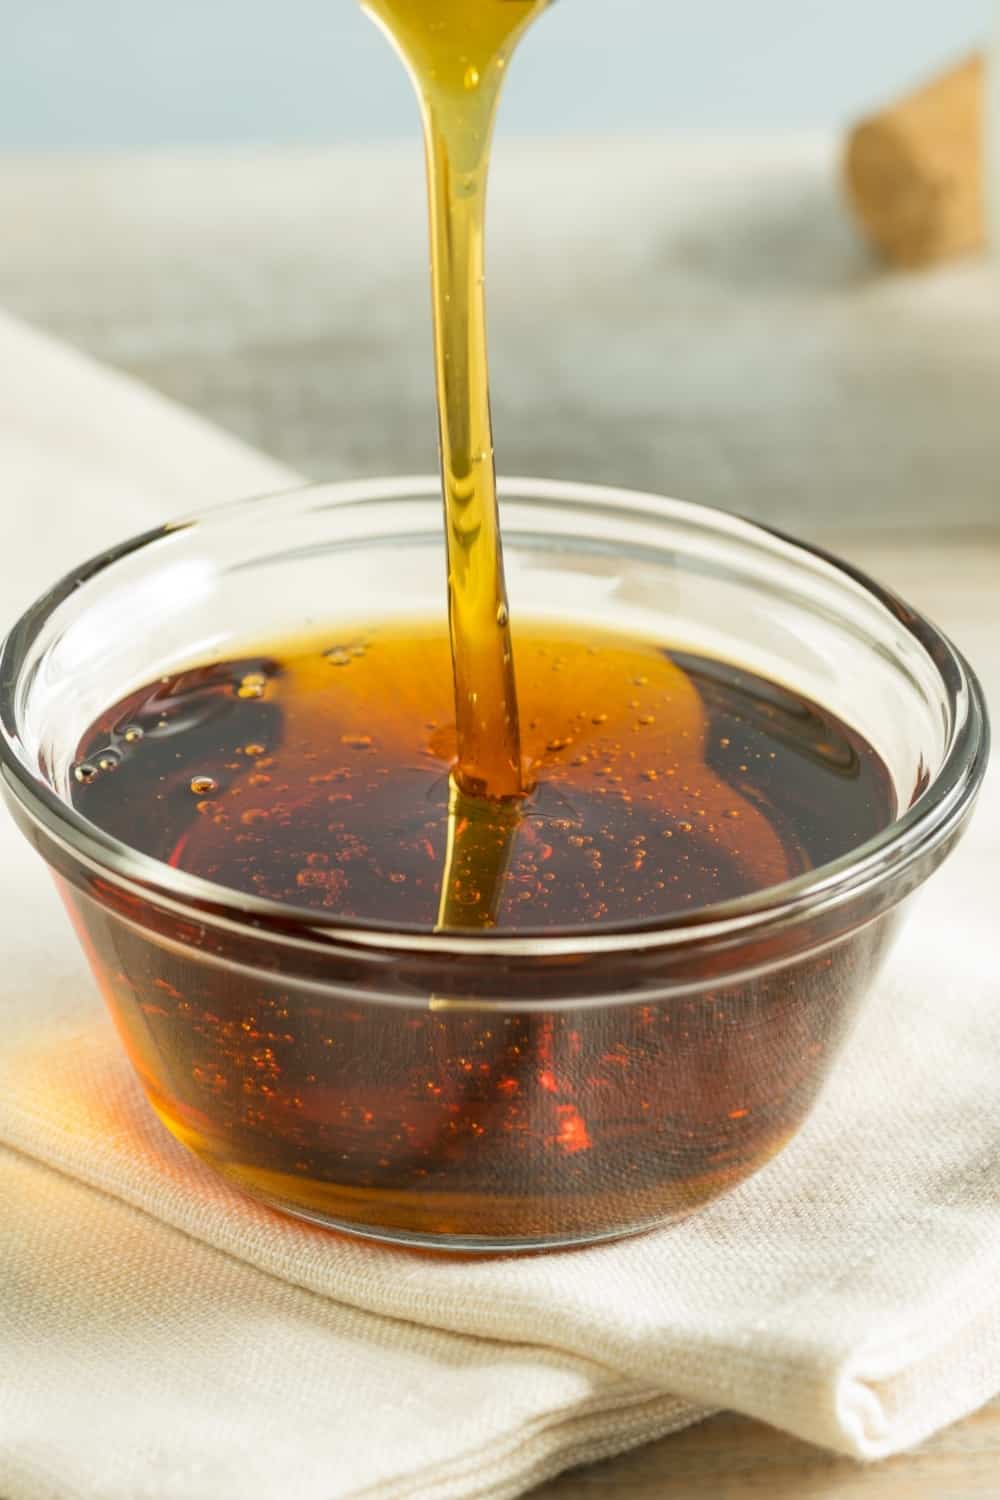 Brown sugar Syrup in a Bowl